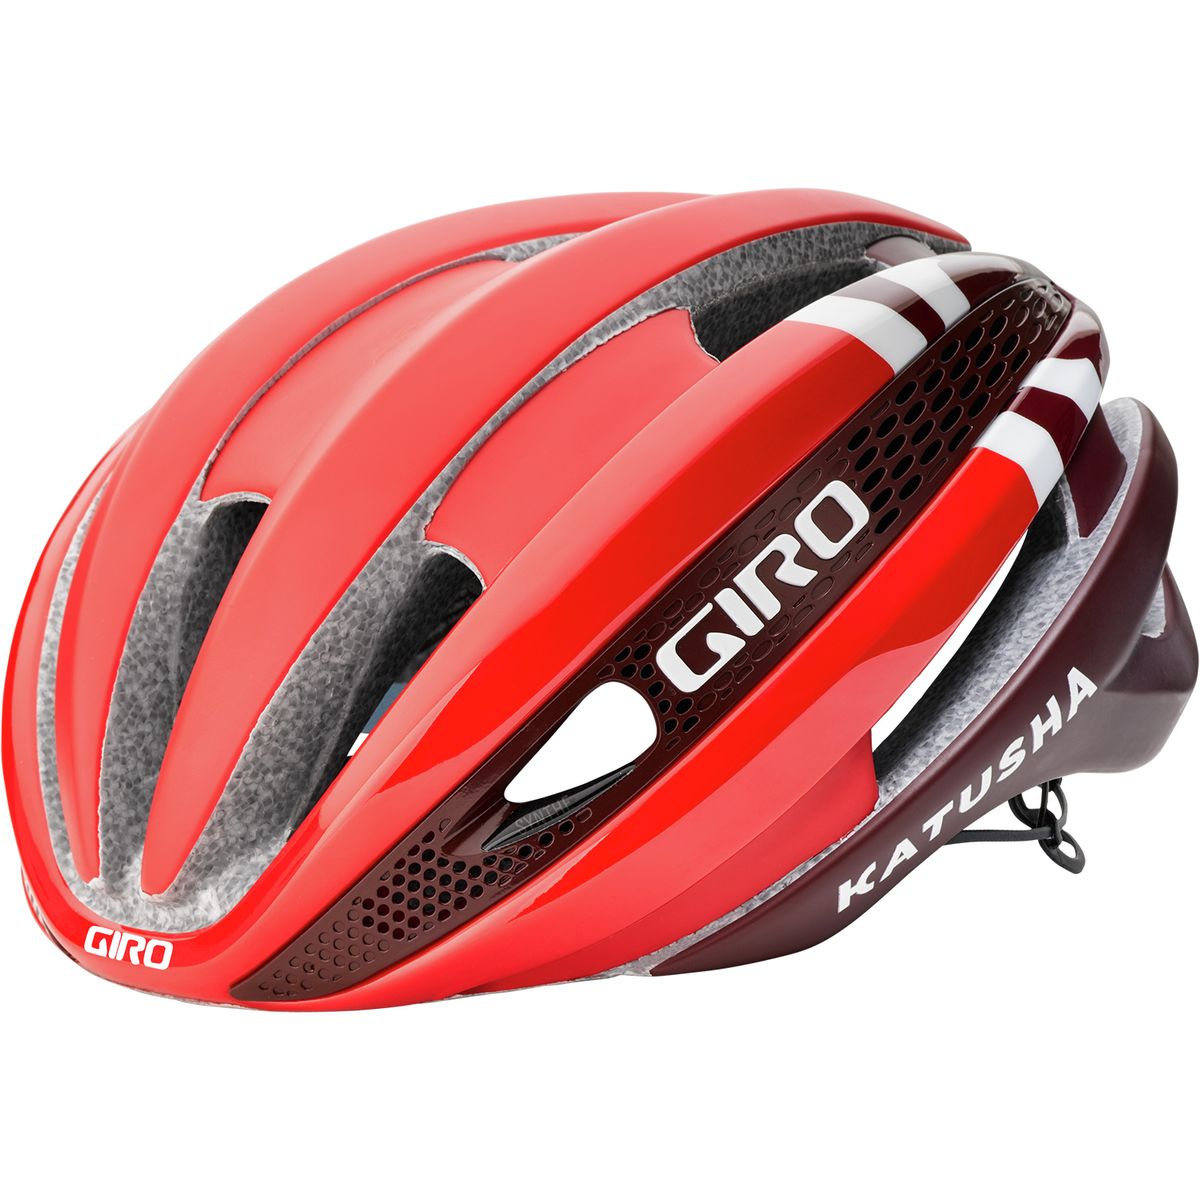 Giro Synthe MIPS Limited Edition Helmet Matte Red Katusha, S